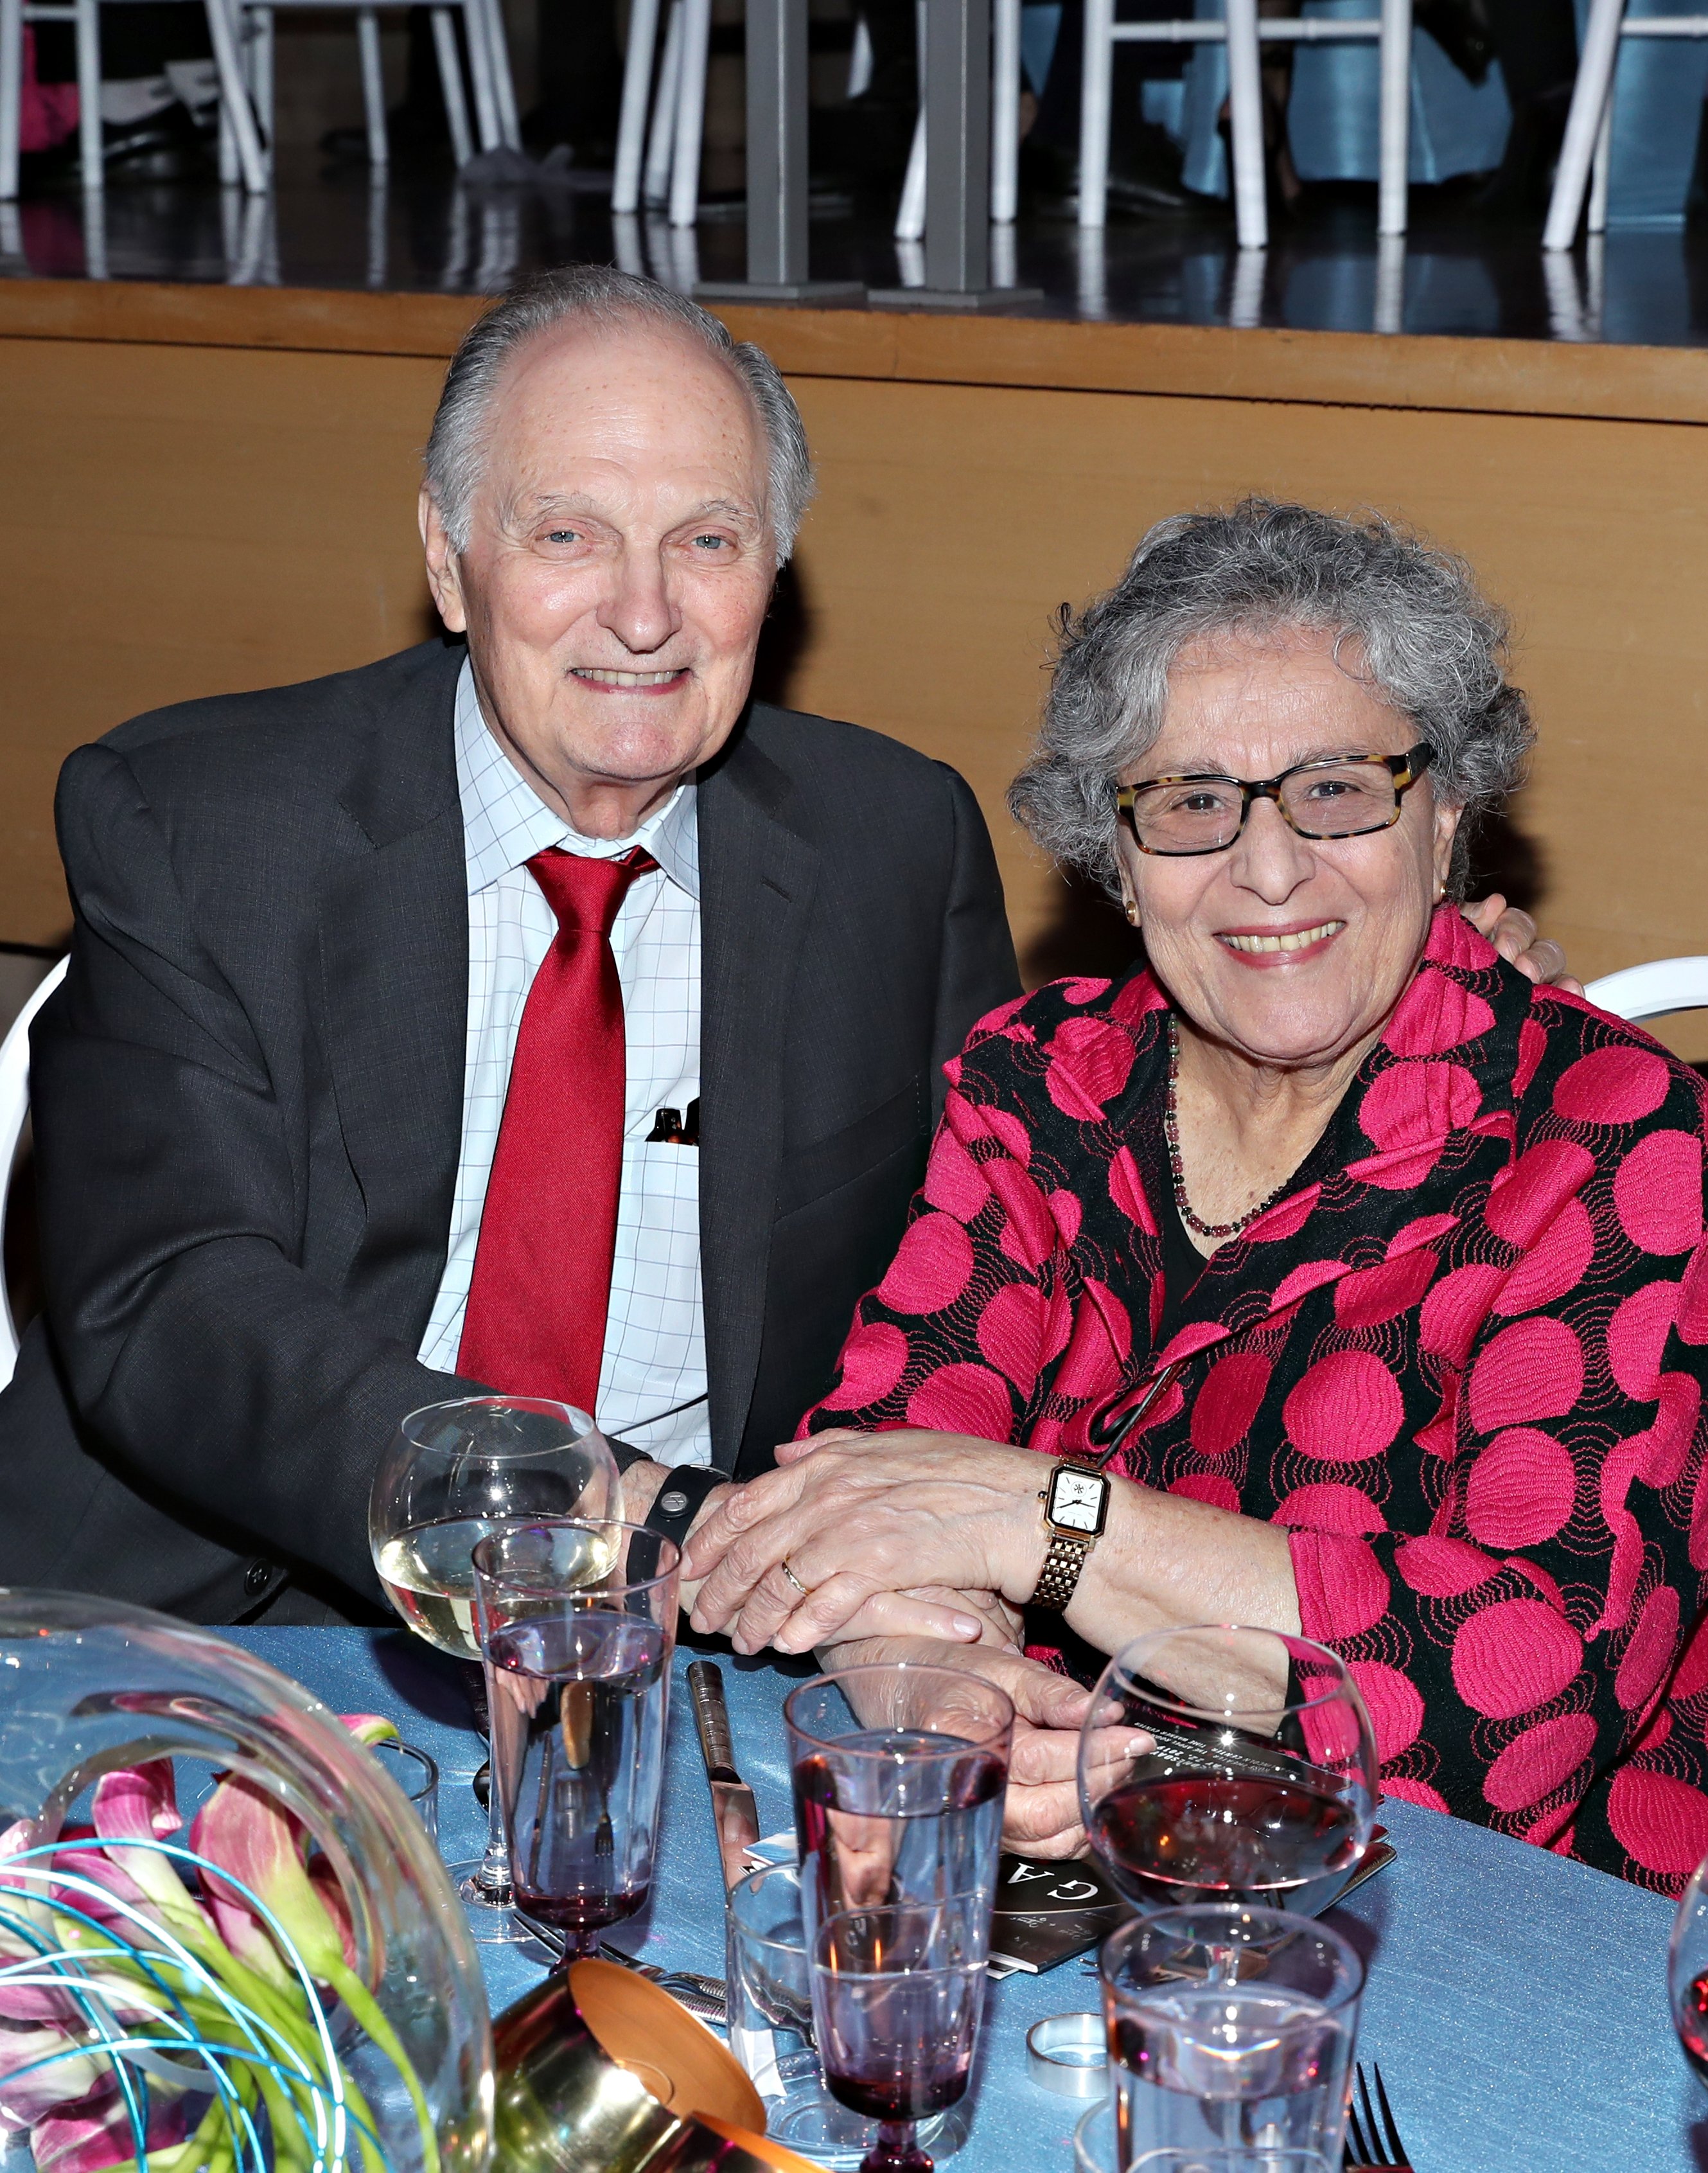 Actor Alan Alda and wife Arlene Alda attend the World Science Festival's 12th Annual Gala at Jazz at Lincoln Center on May 22, 2019 in New York City. | Source: Getty Images